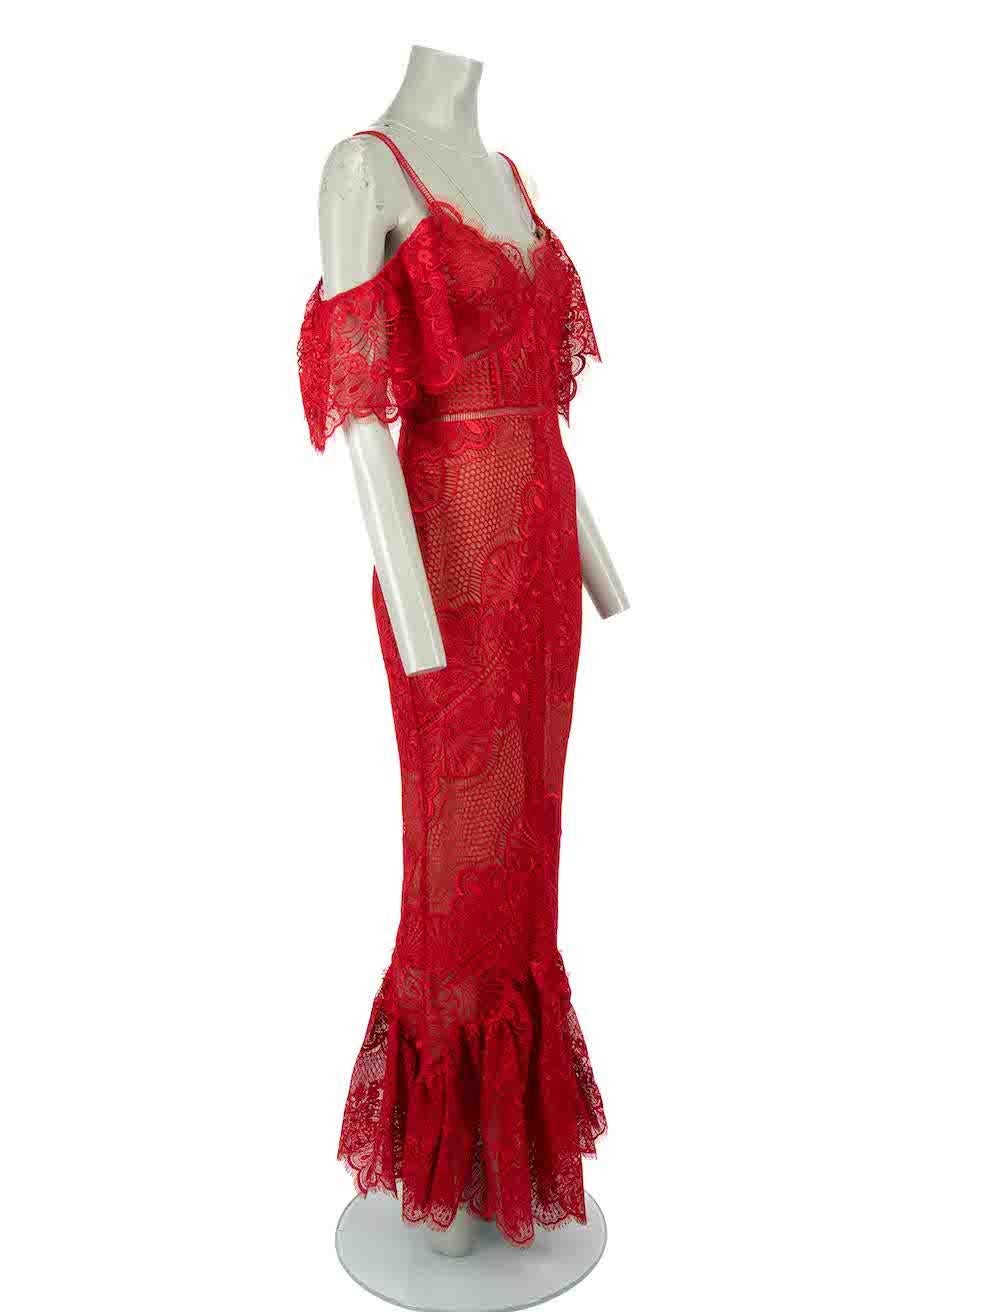 CONDITION is Very good. Hardly any visible wear to dress is evident on this used Marchesa Notte designer resale item.
 
 Details
 Red
 Polyester lace
 Dress
 V-neck
 Maxi
 Back zip fastening
 Off-the-shoulder
 
 
 Made in China
 
 Composition
 100%